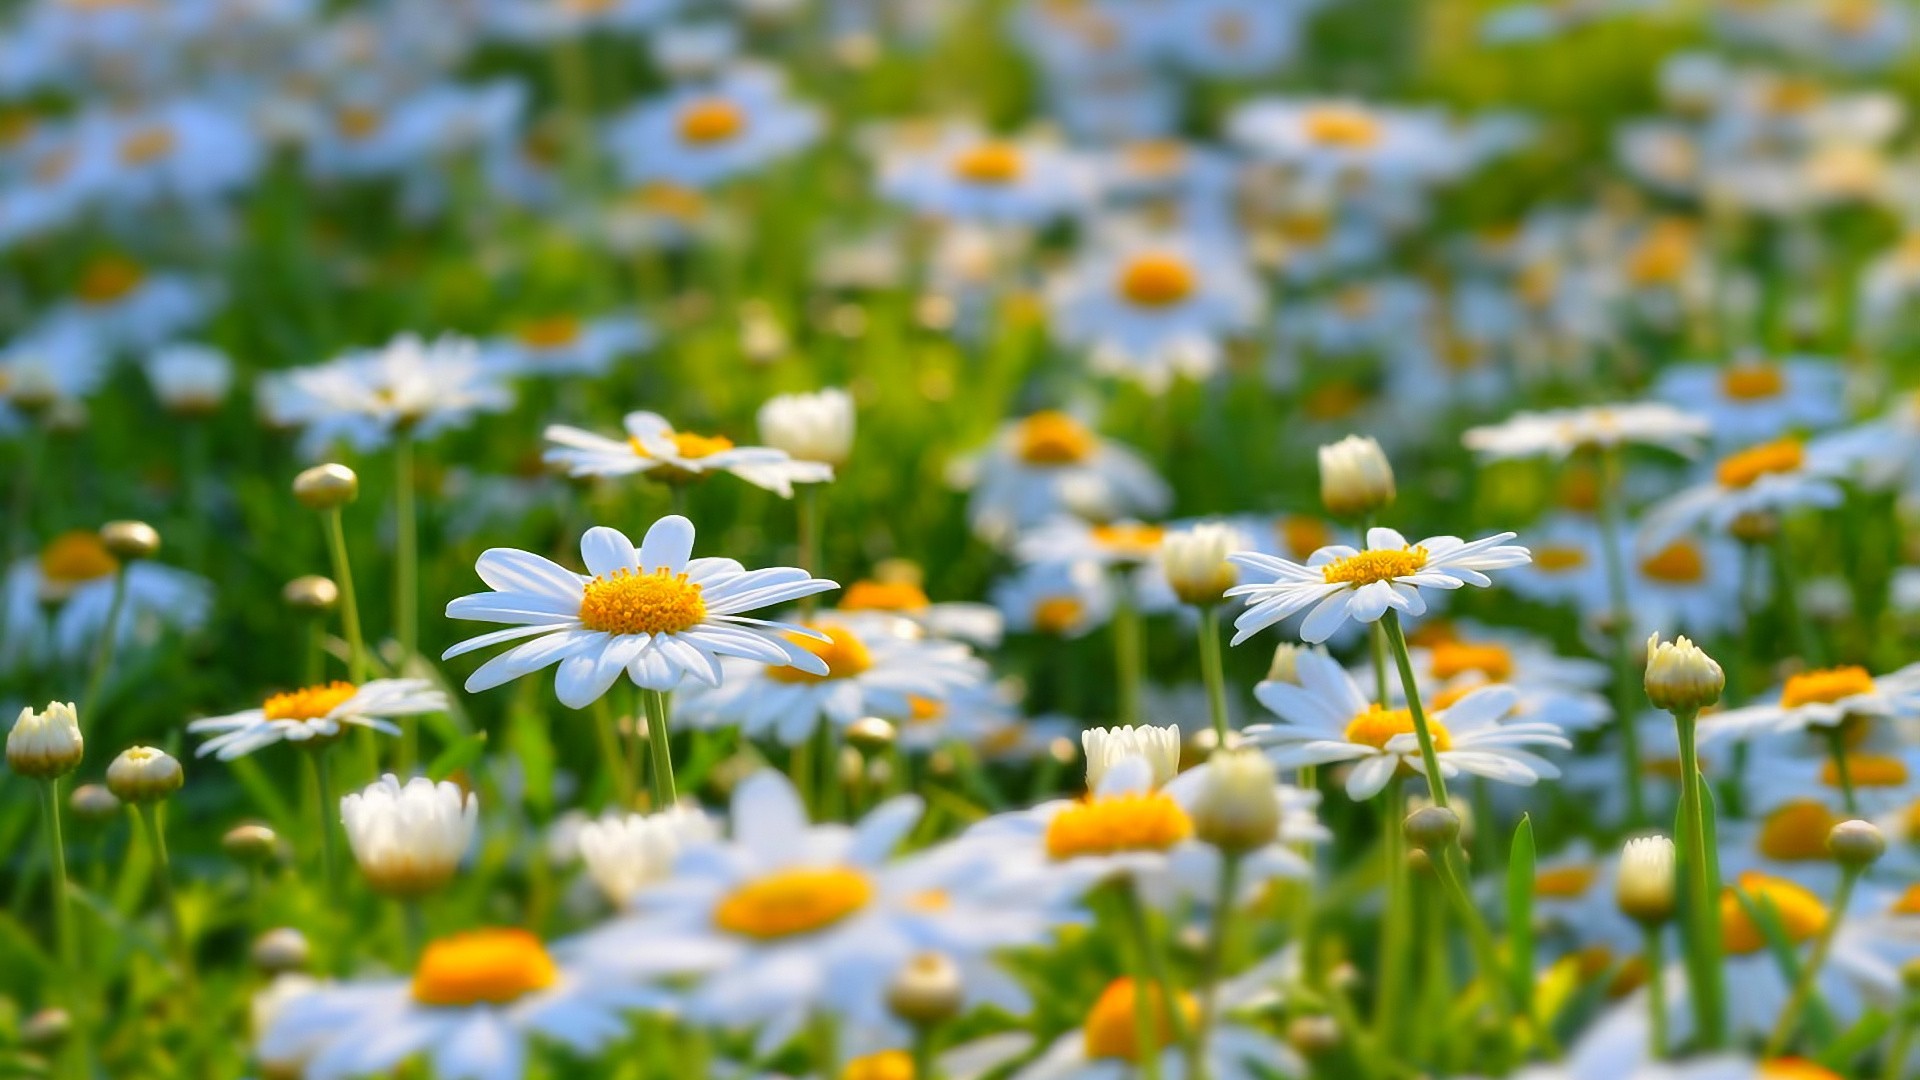 General 1920x1080 daisies flowers white flowers nature chamomile vibrant plants